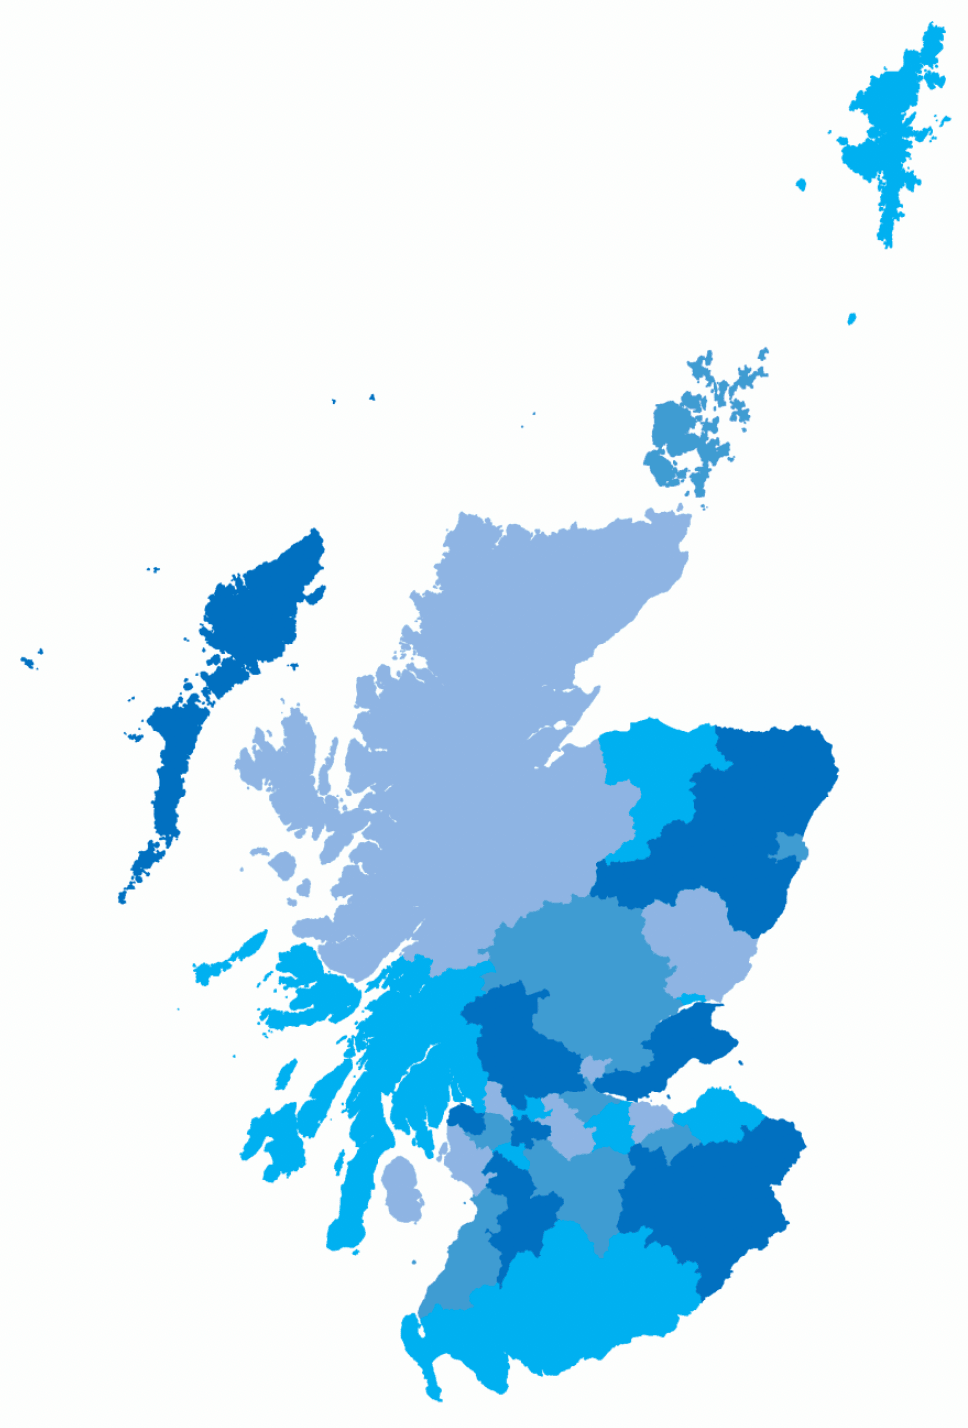 Map of Scotland showing the 32 councils